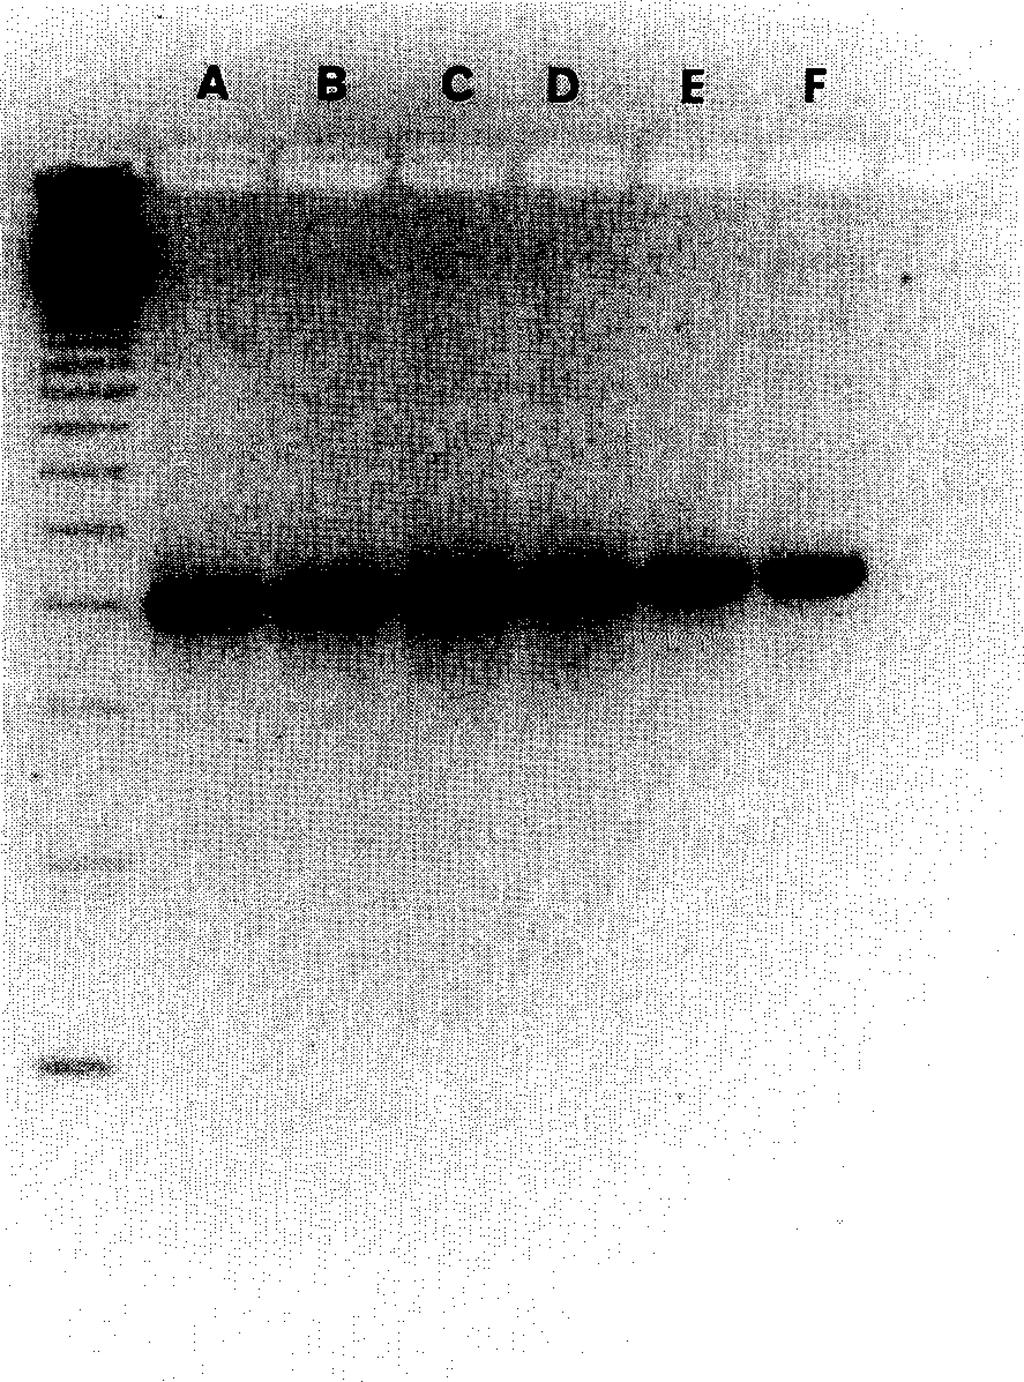 Von Lubitz et al. Page 10 NIH-PA Author Manuscript NIH-PA Author Manuscript NIH-PA Author Manuscript Fig. 1. RT-PCR products obtained from 3 different regions of mouse brain and separated on a 3.